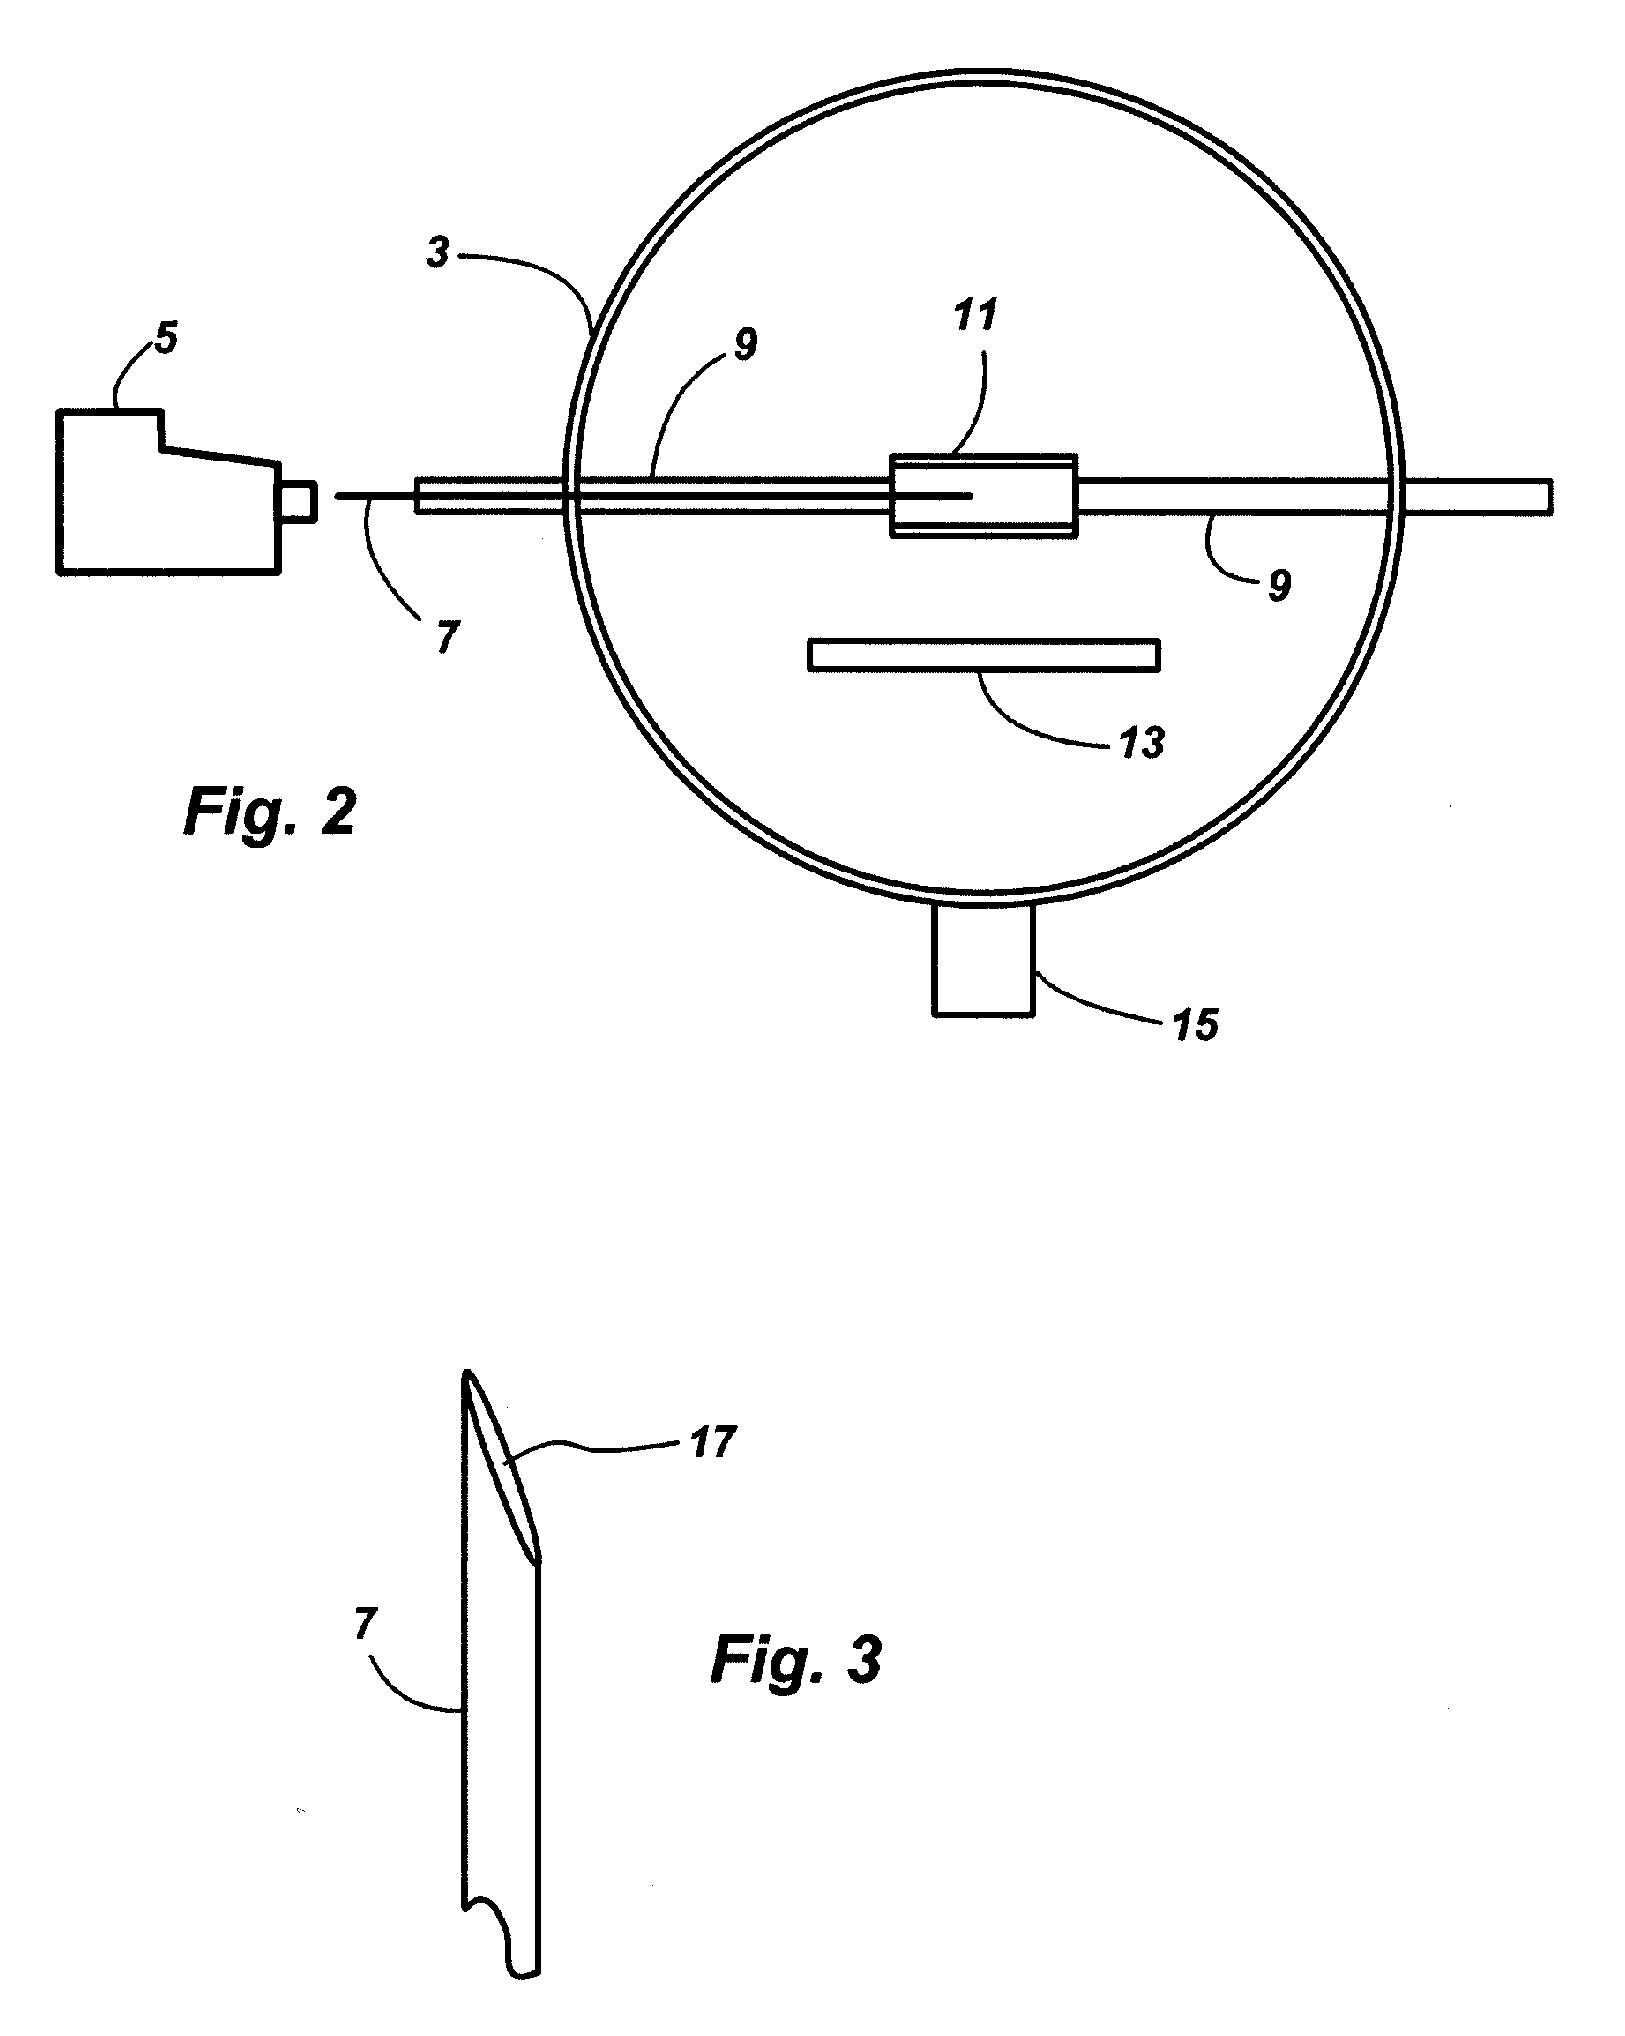 High Total Transmittance Alumina Discharge Vessels Having Submicron Grain Size